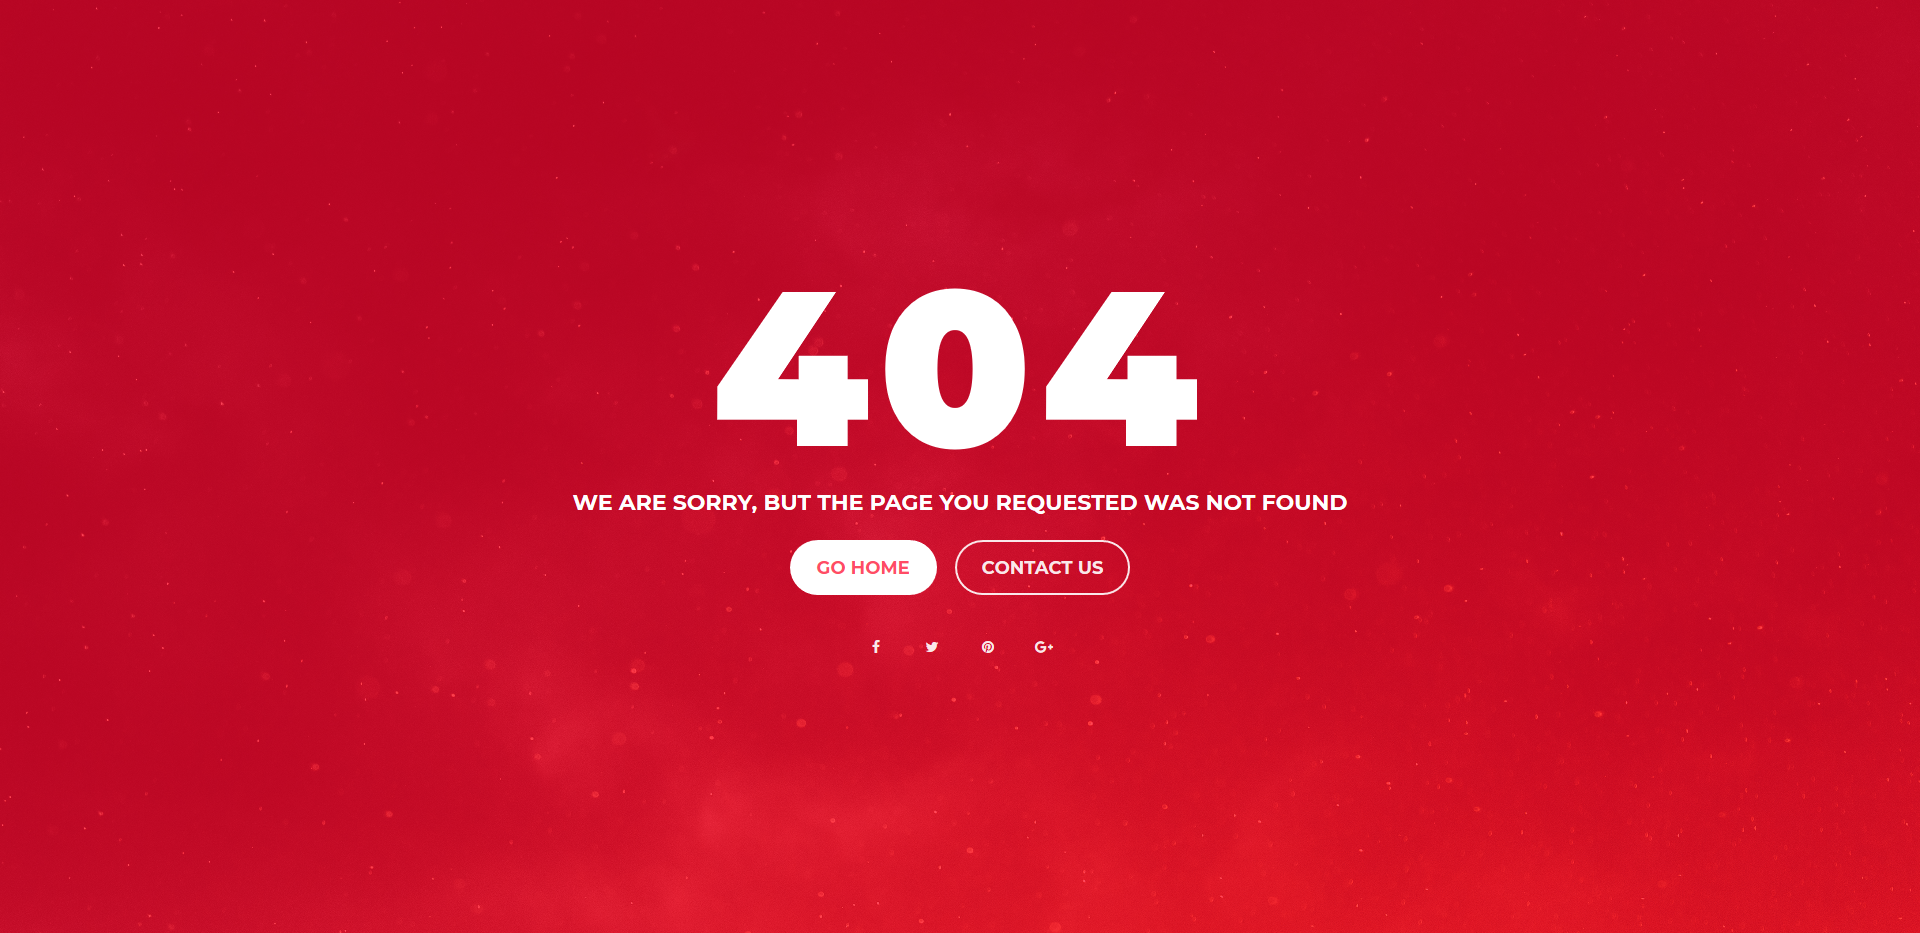 Simple red 404 not found error page example and template